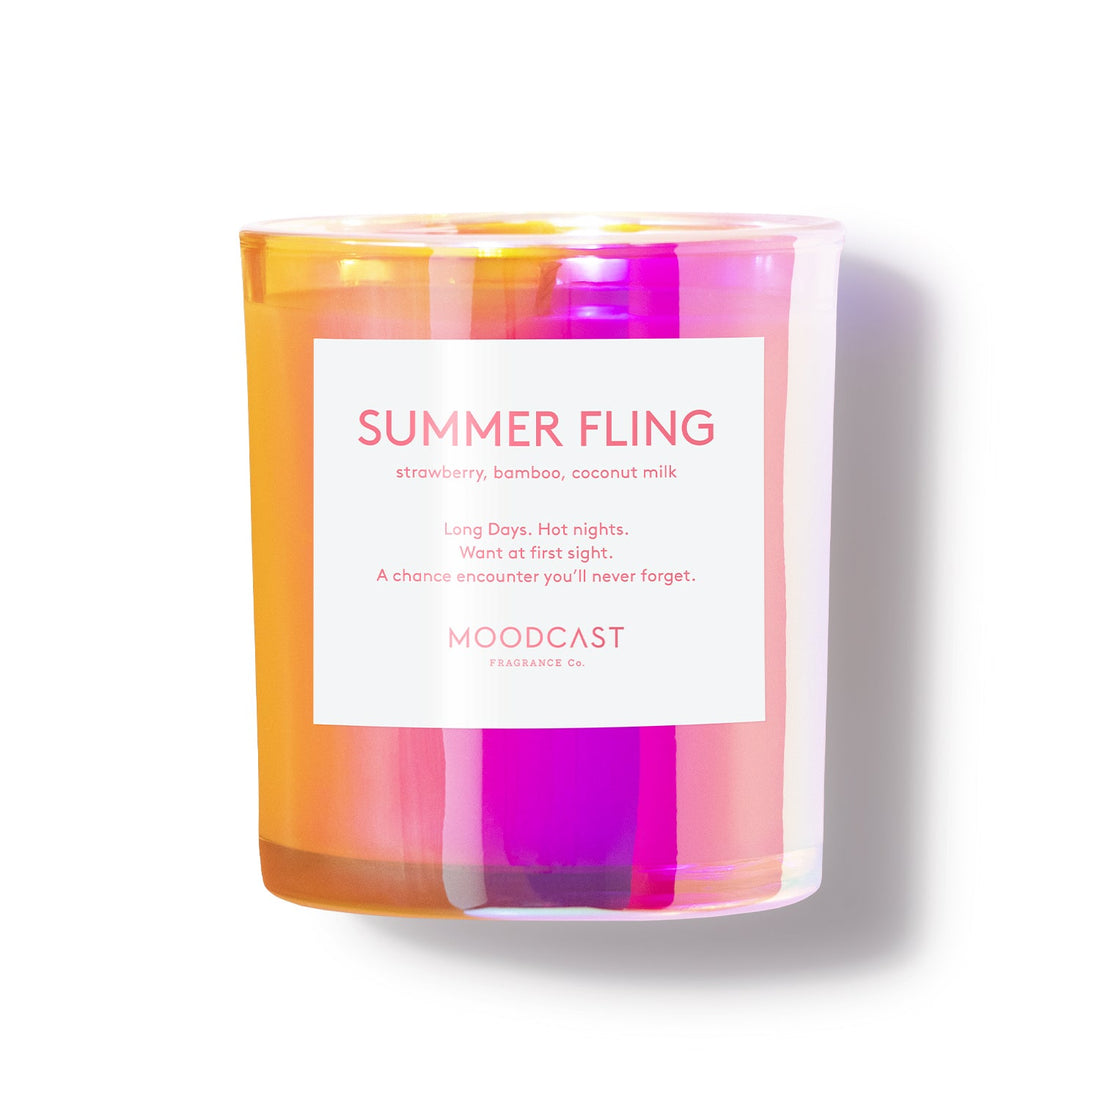 Summer Fling - Vibes Collection (Iridescent) - 8oz/227g Coconut Wax Blend Glass Jar Candle - Key Notes: Strawberry, Bamboo, Coconut Milk